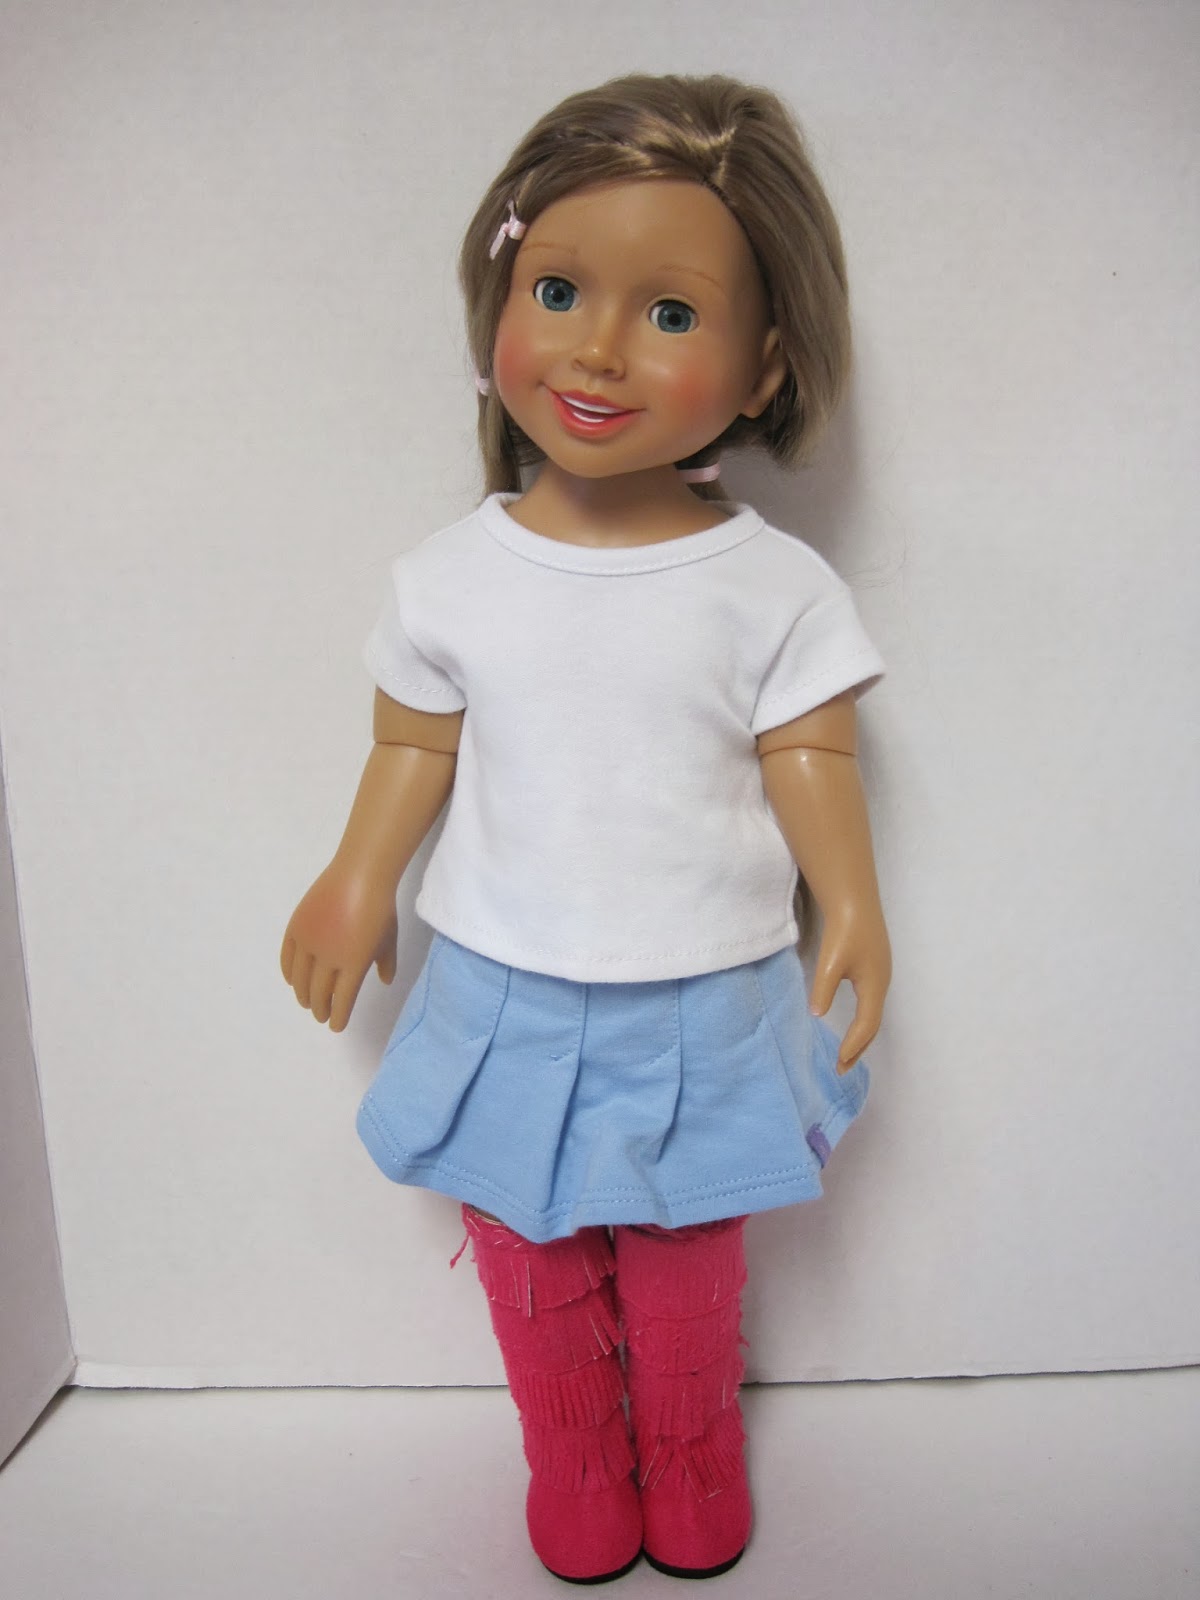 Never Grow Up: A Mom's Guide to Dolls and More: Via E Alexis Doll Review